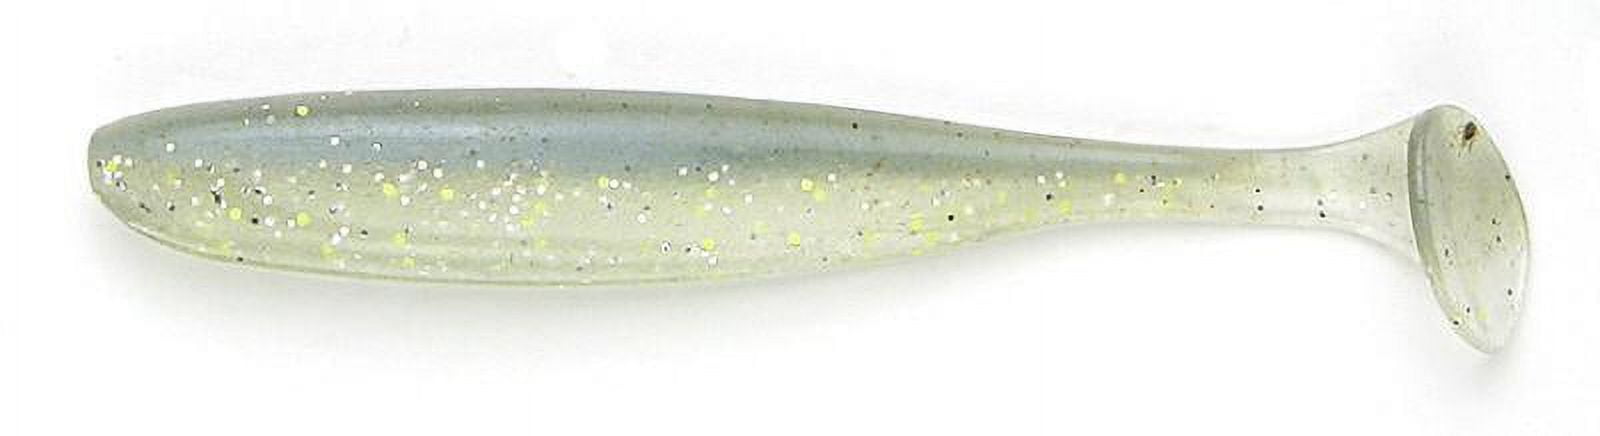 Keitech Easy Shiner 2 inch Soft Paddle Tail Swimbait 